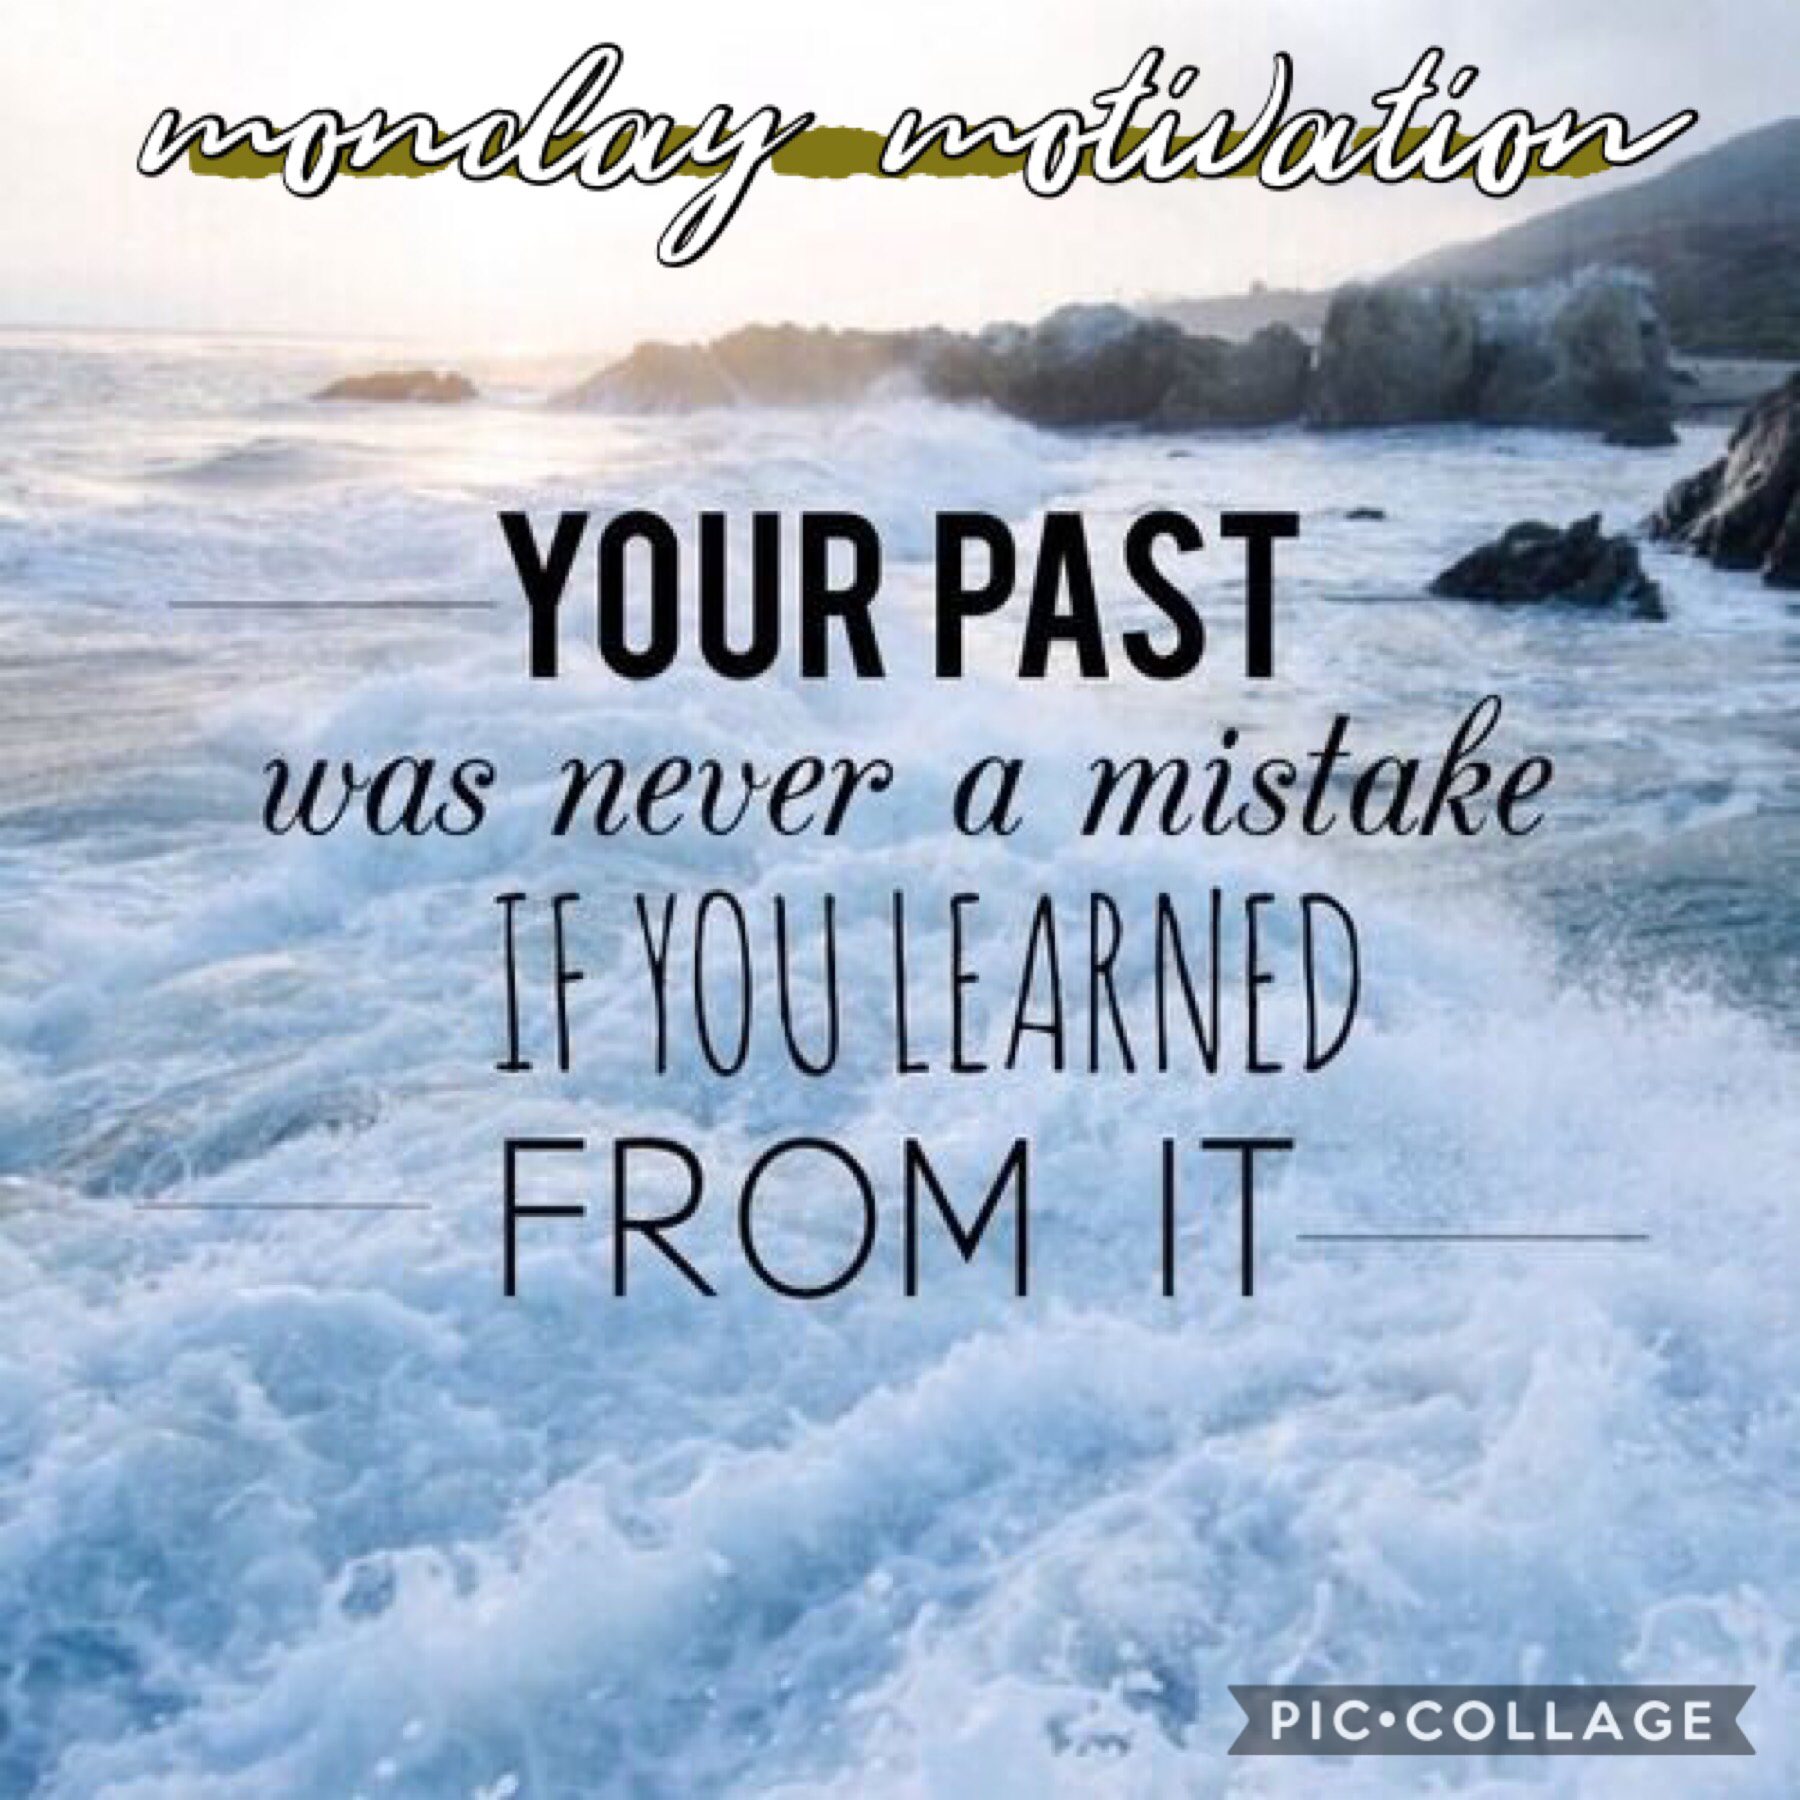 💙as long as you learn from your past, it’s not a mistake💙 
struggling with my past actions today and i searched up some quotes and although this was the first one that popped up, it rlly hit the most. 